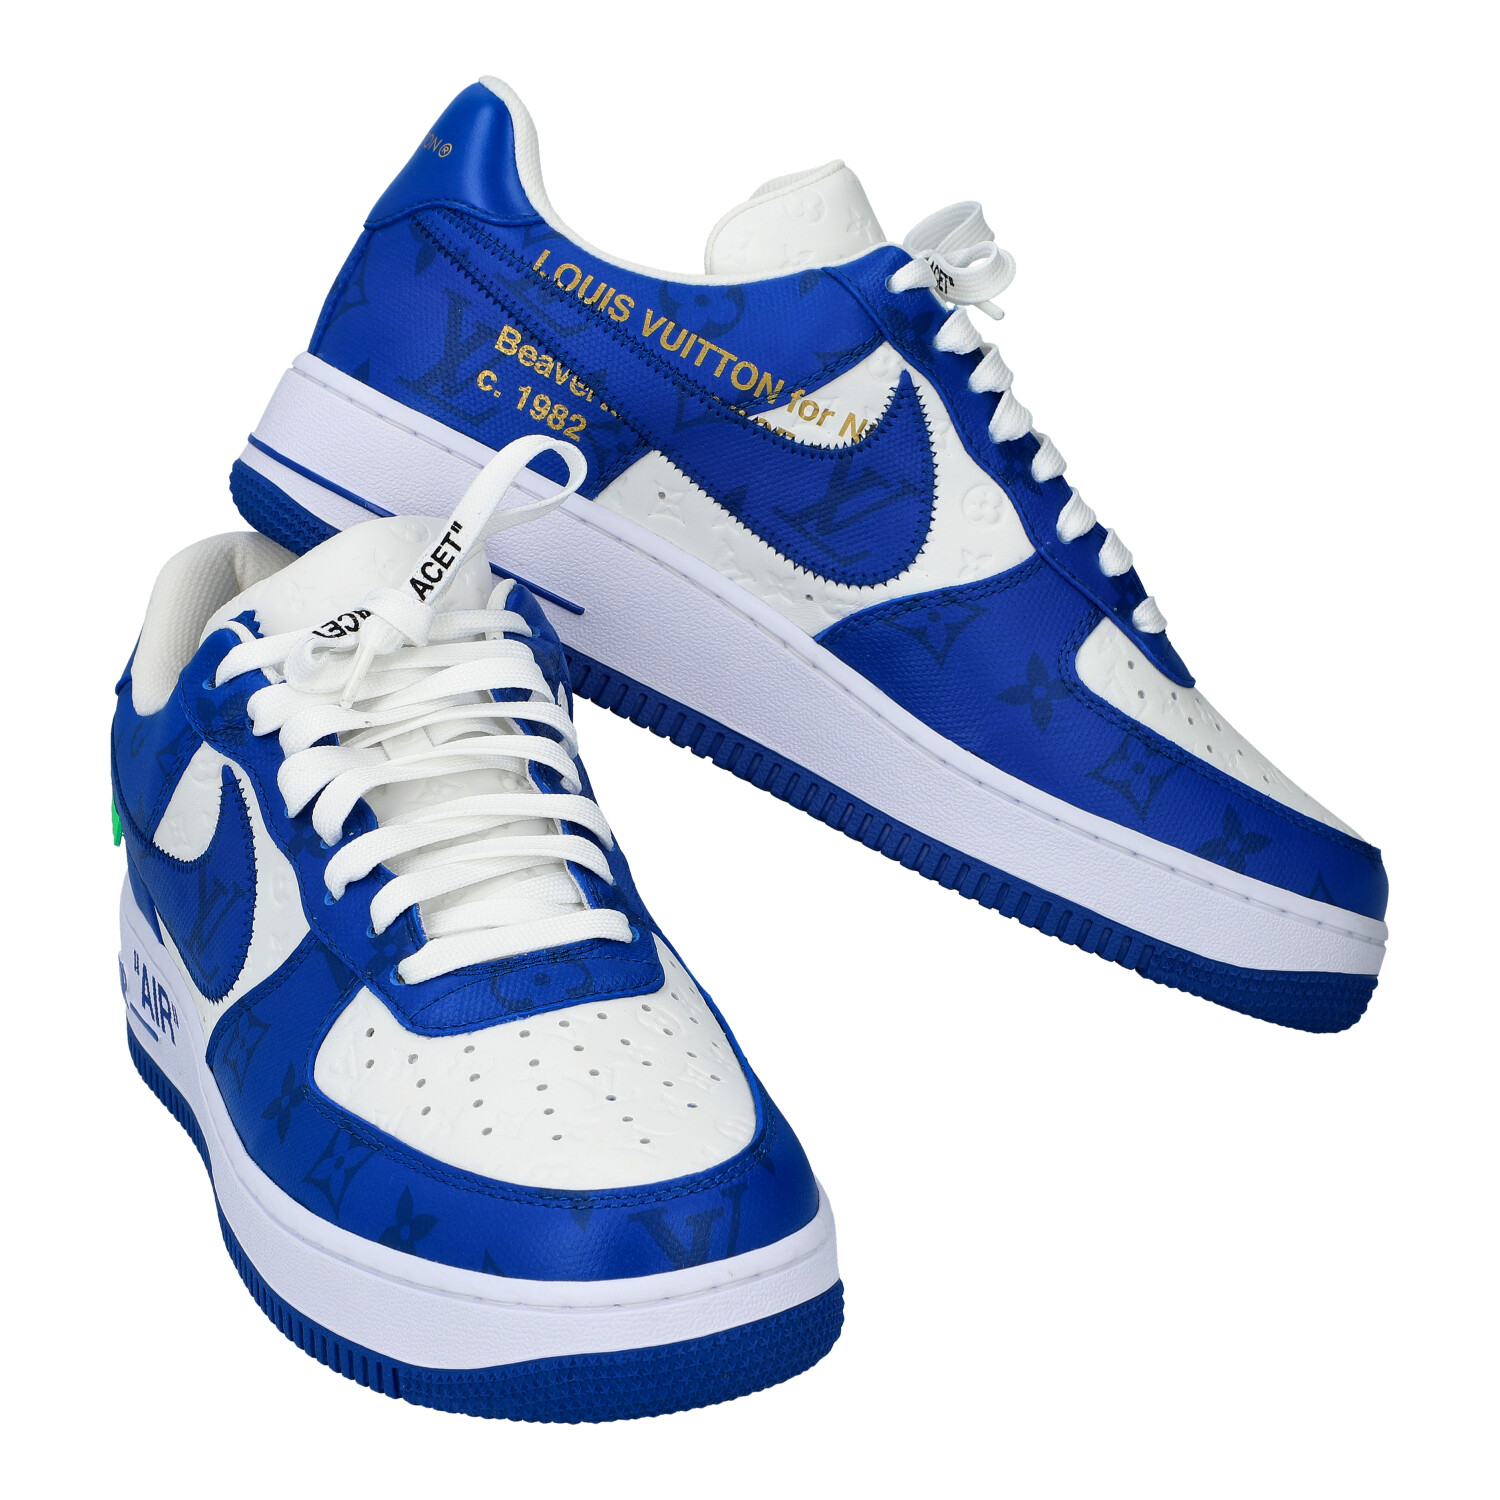 LOUIS VUITTON x NIKE Sneakers "AIR FORCE 1", Gr. 9. - Image 7 of 10